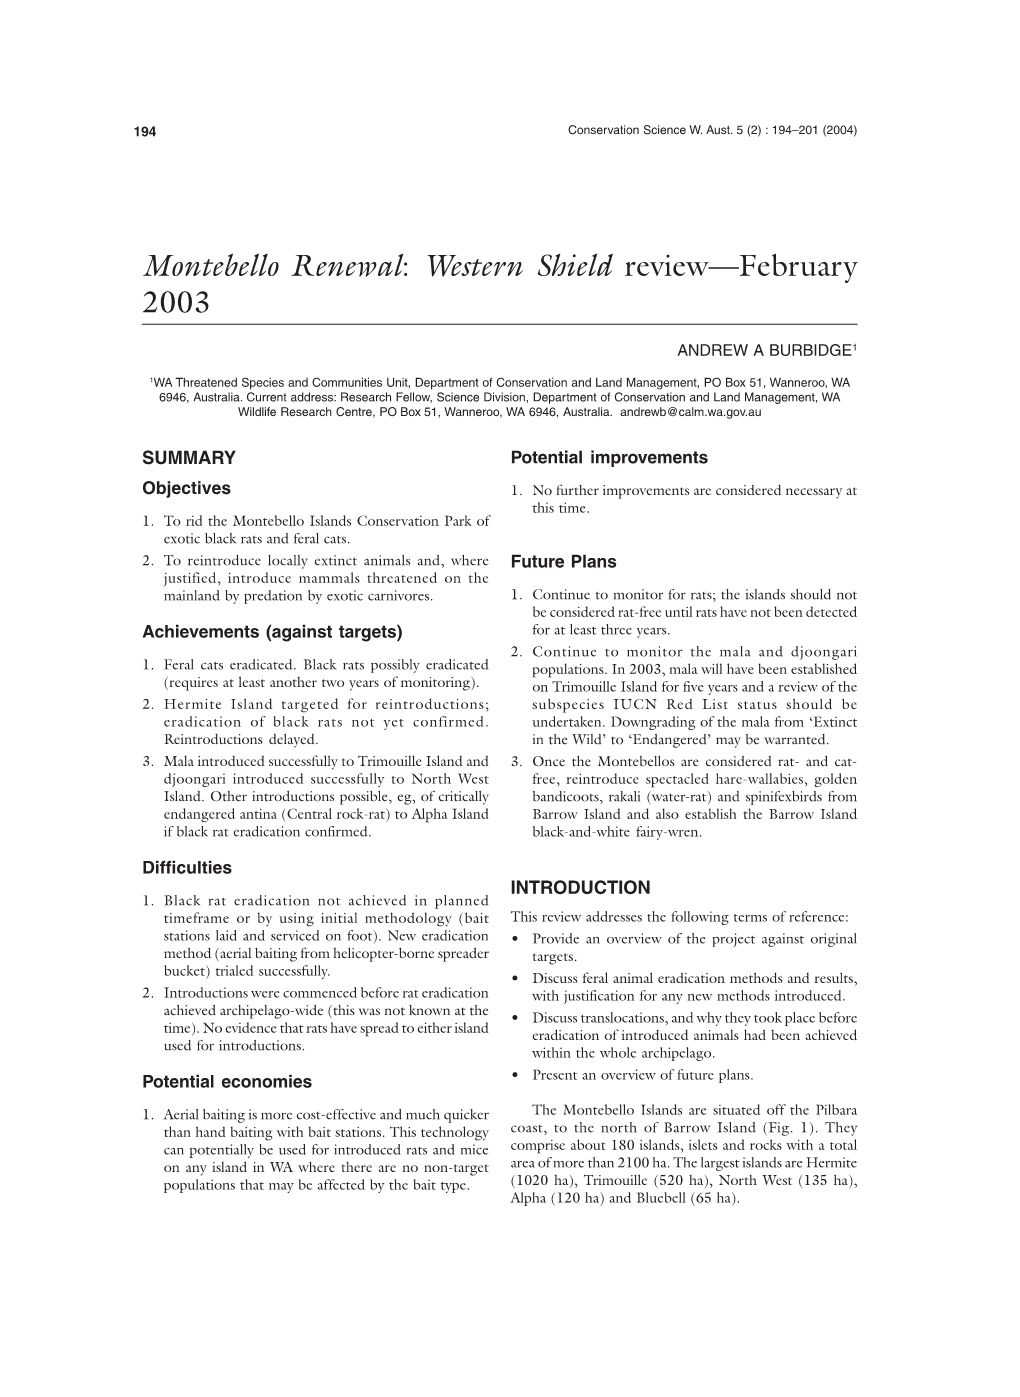 Montebello Renewal: Western Shield Review—February 2003